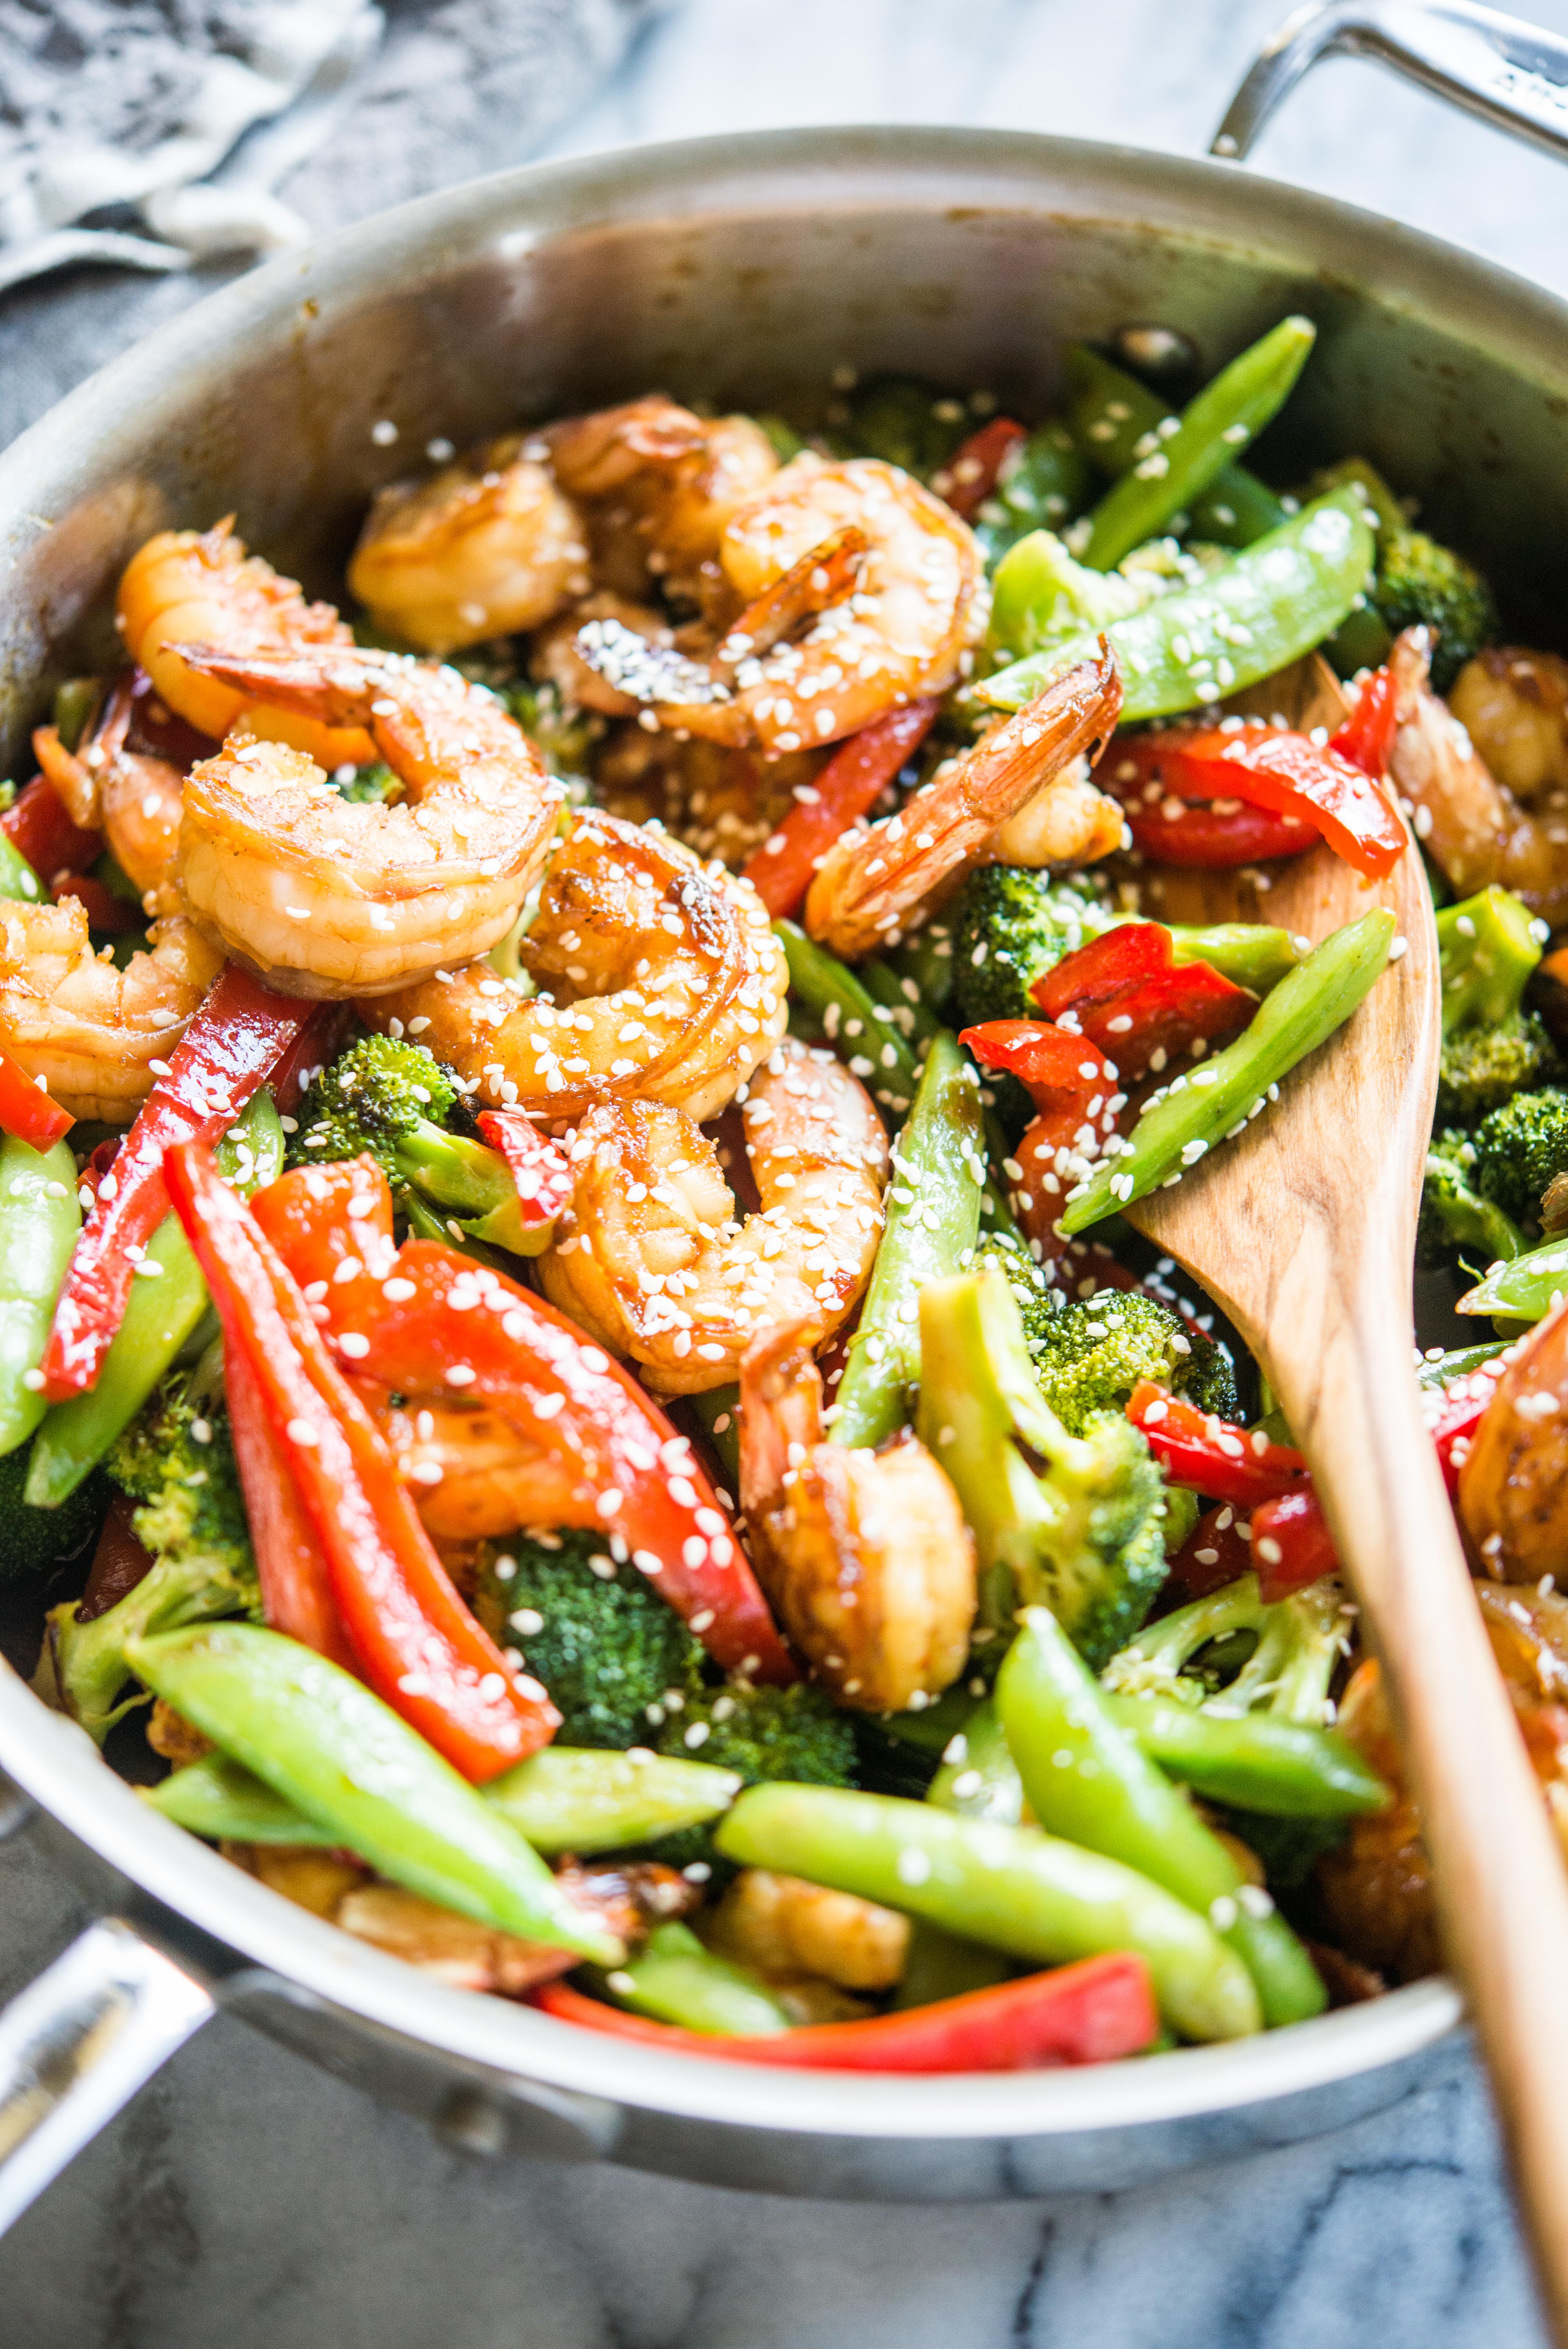 teriyaki shrimp stir fry with shrimp, red bell peppers, broccoli, and snap peas in a stainless steel skillet on a marble countertop